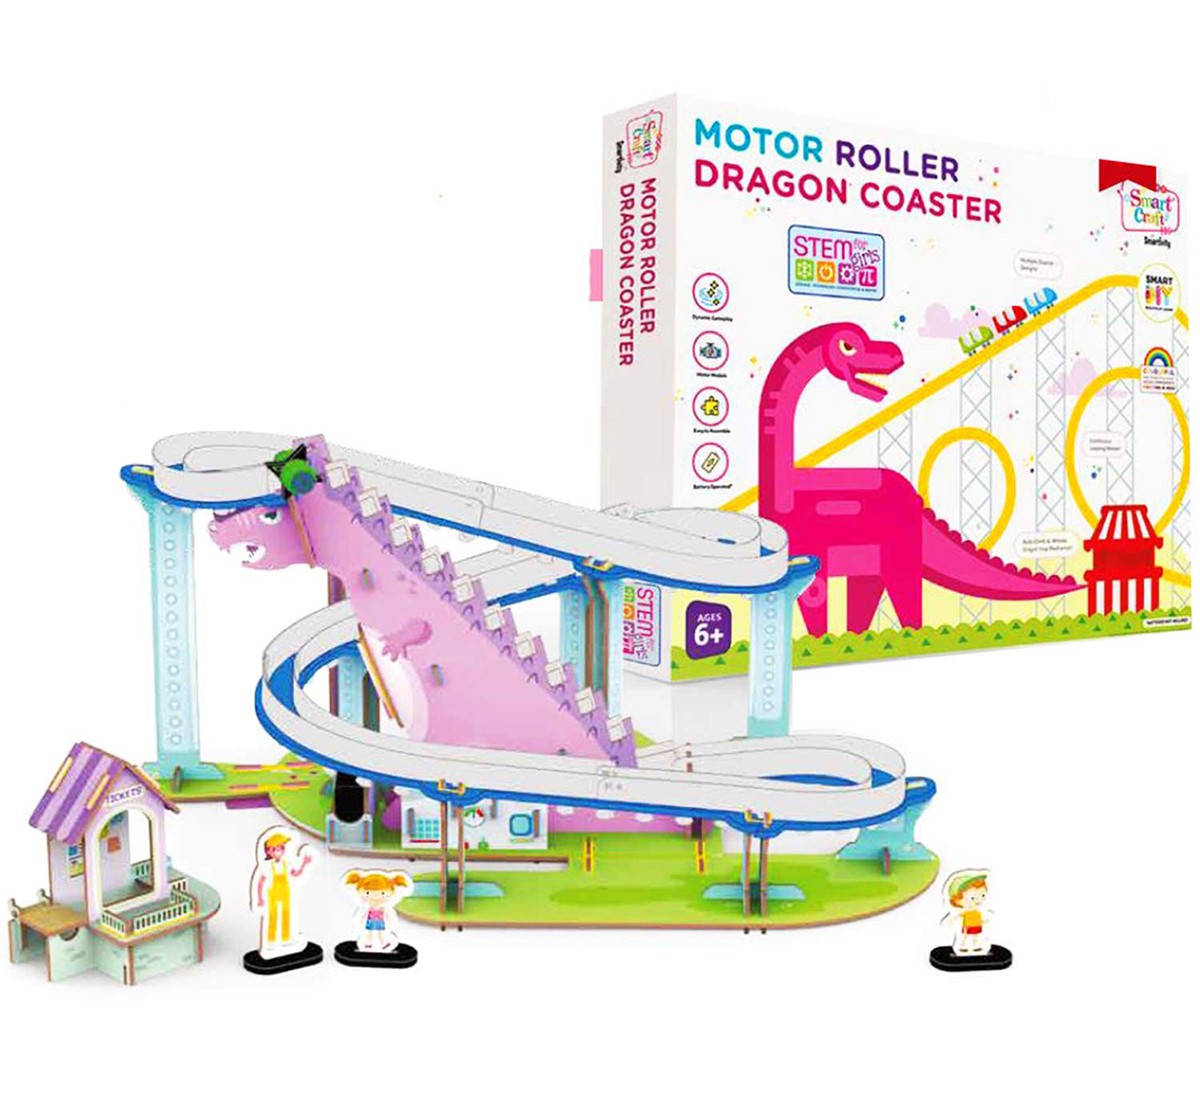 Smartivity Motor Roller Dragon Coaster: Stem, Diy, Educational, Learning, Building and Construction Toy for Kids age 6Y+ 